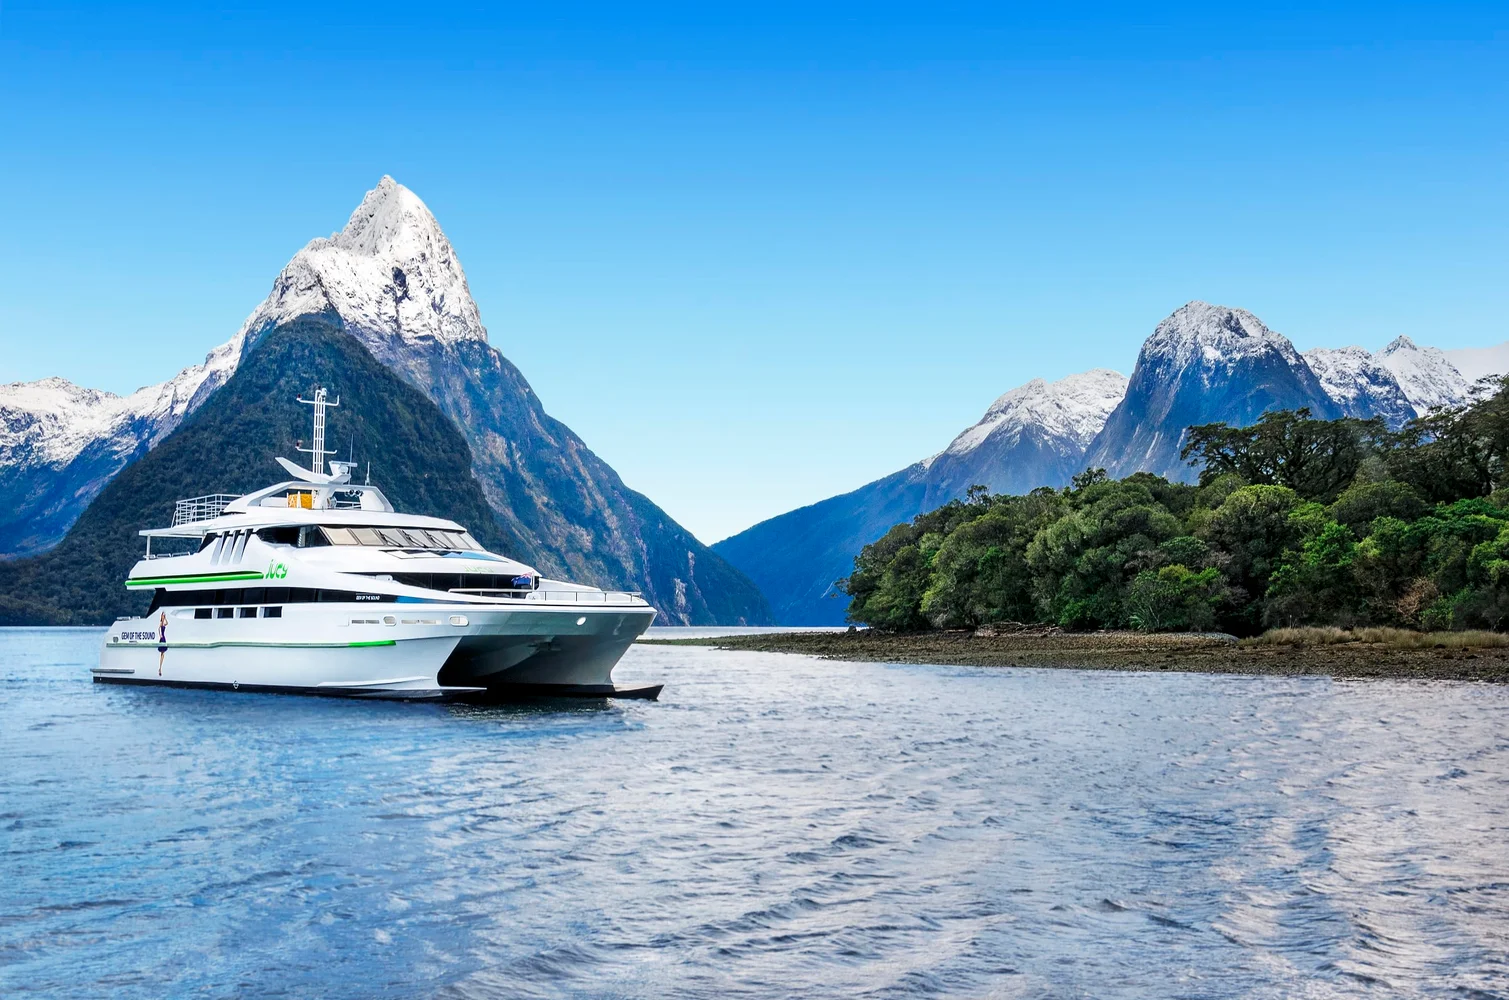 Cruise Milford Sound, New Zealand's 8th Wonder of the World